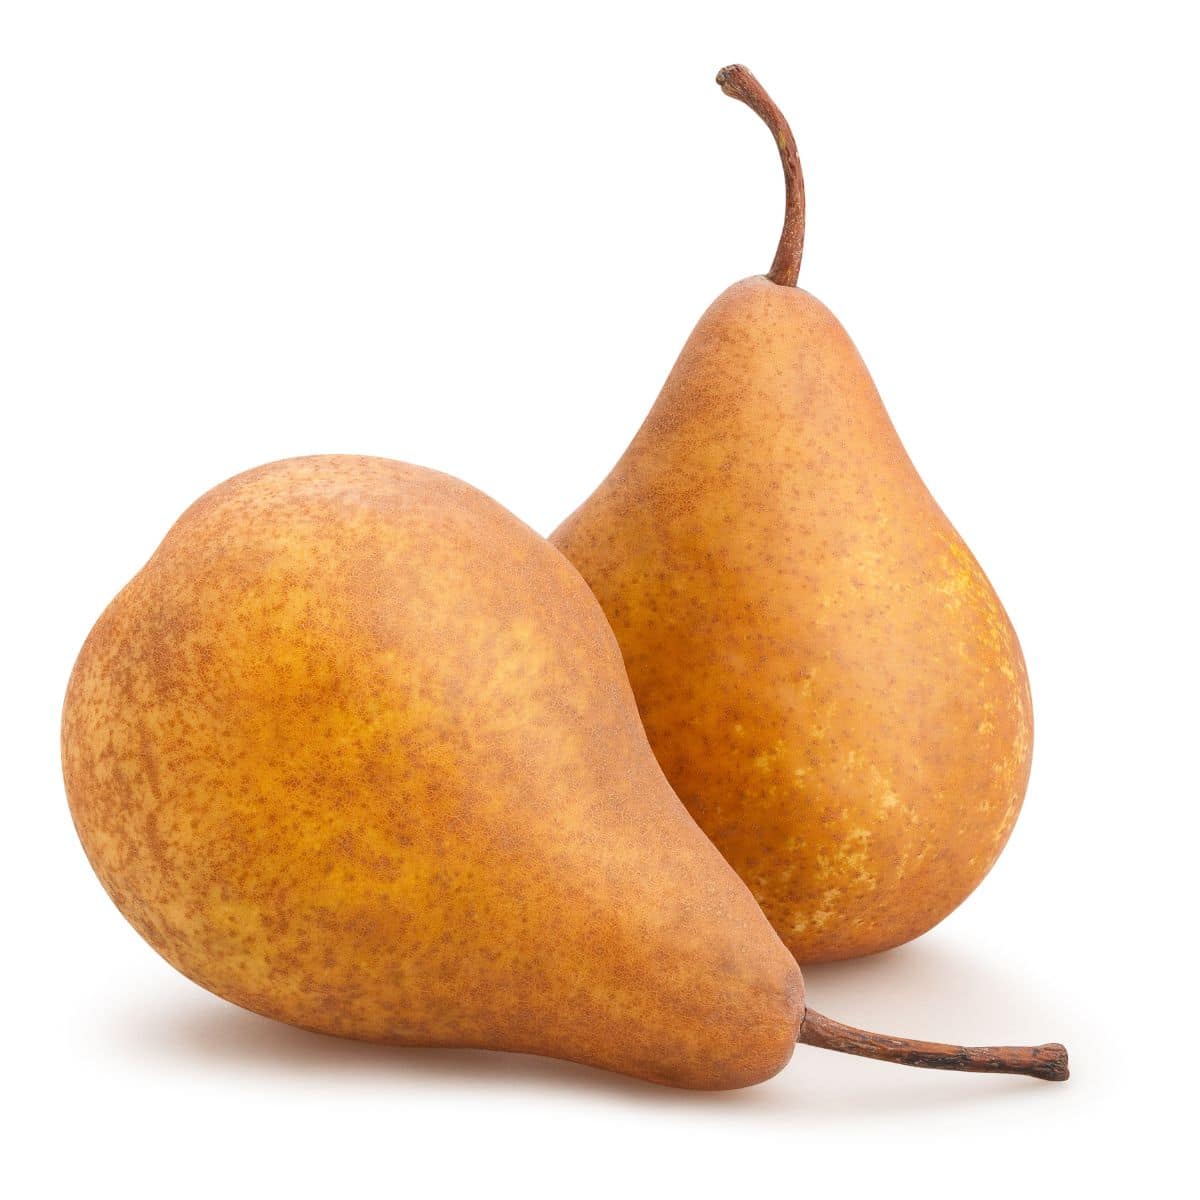 bosc pears on a white background.